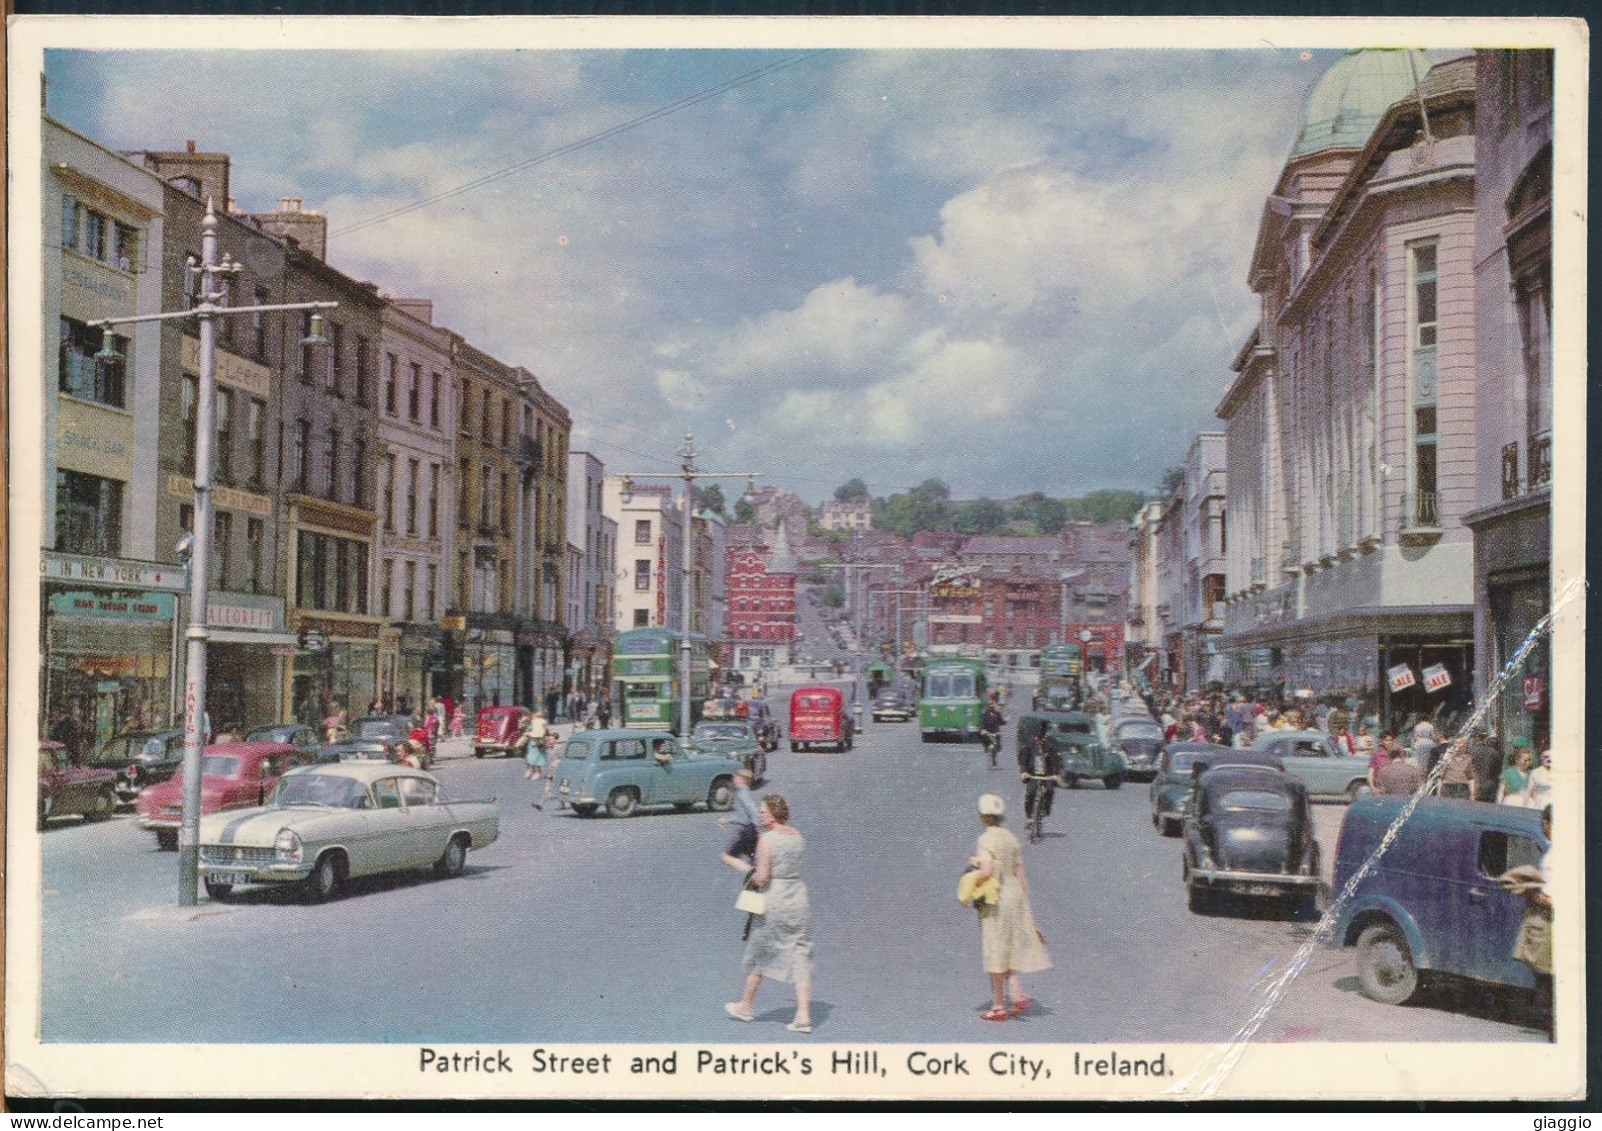 °°° 30909 - IRELAND - CORK CITY - PATRICK STREET AND PATRICK'S HILL - 1963 With Stamps °°° - Cork